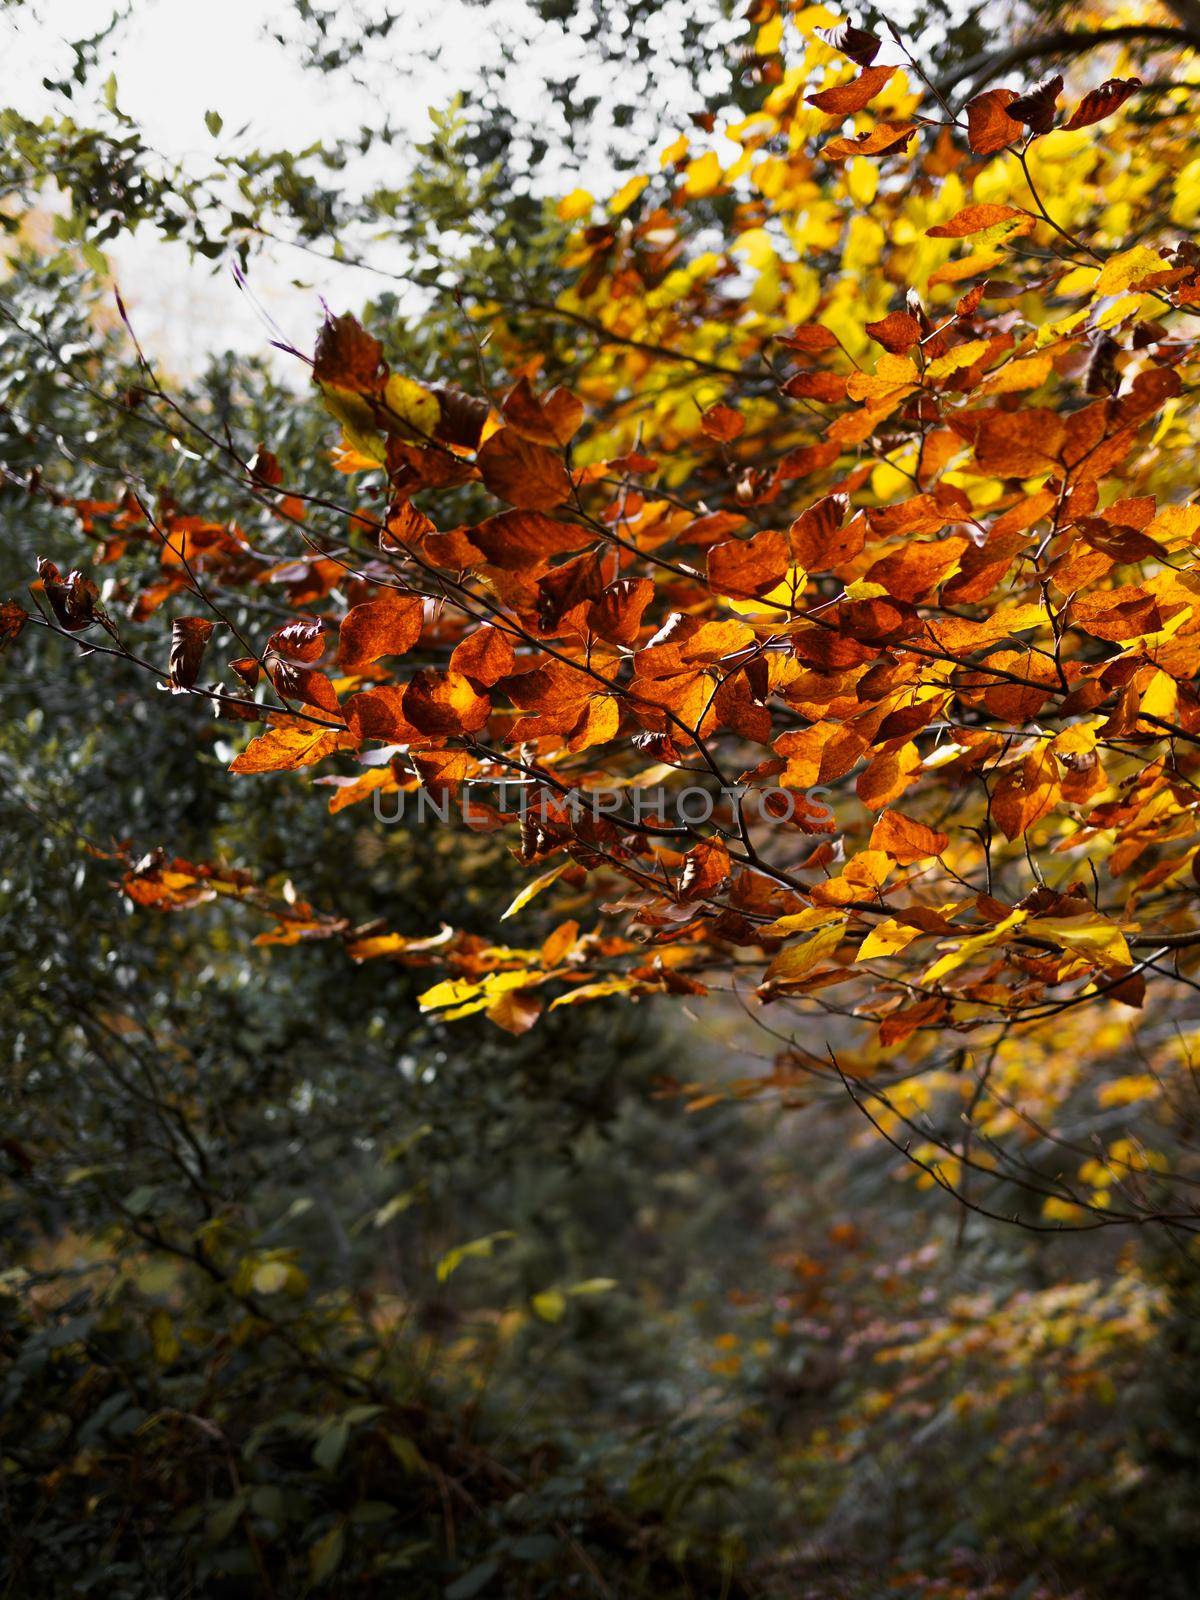 Amazing autumn forest in morning sunlight. Red and yellow leaves on trees in woodland. Golden forest landscape